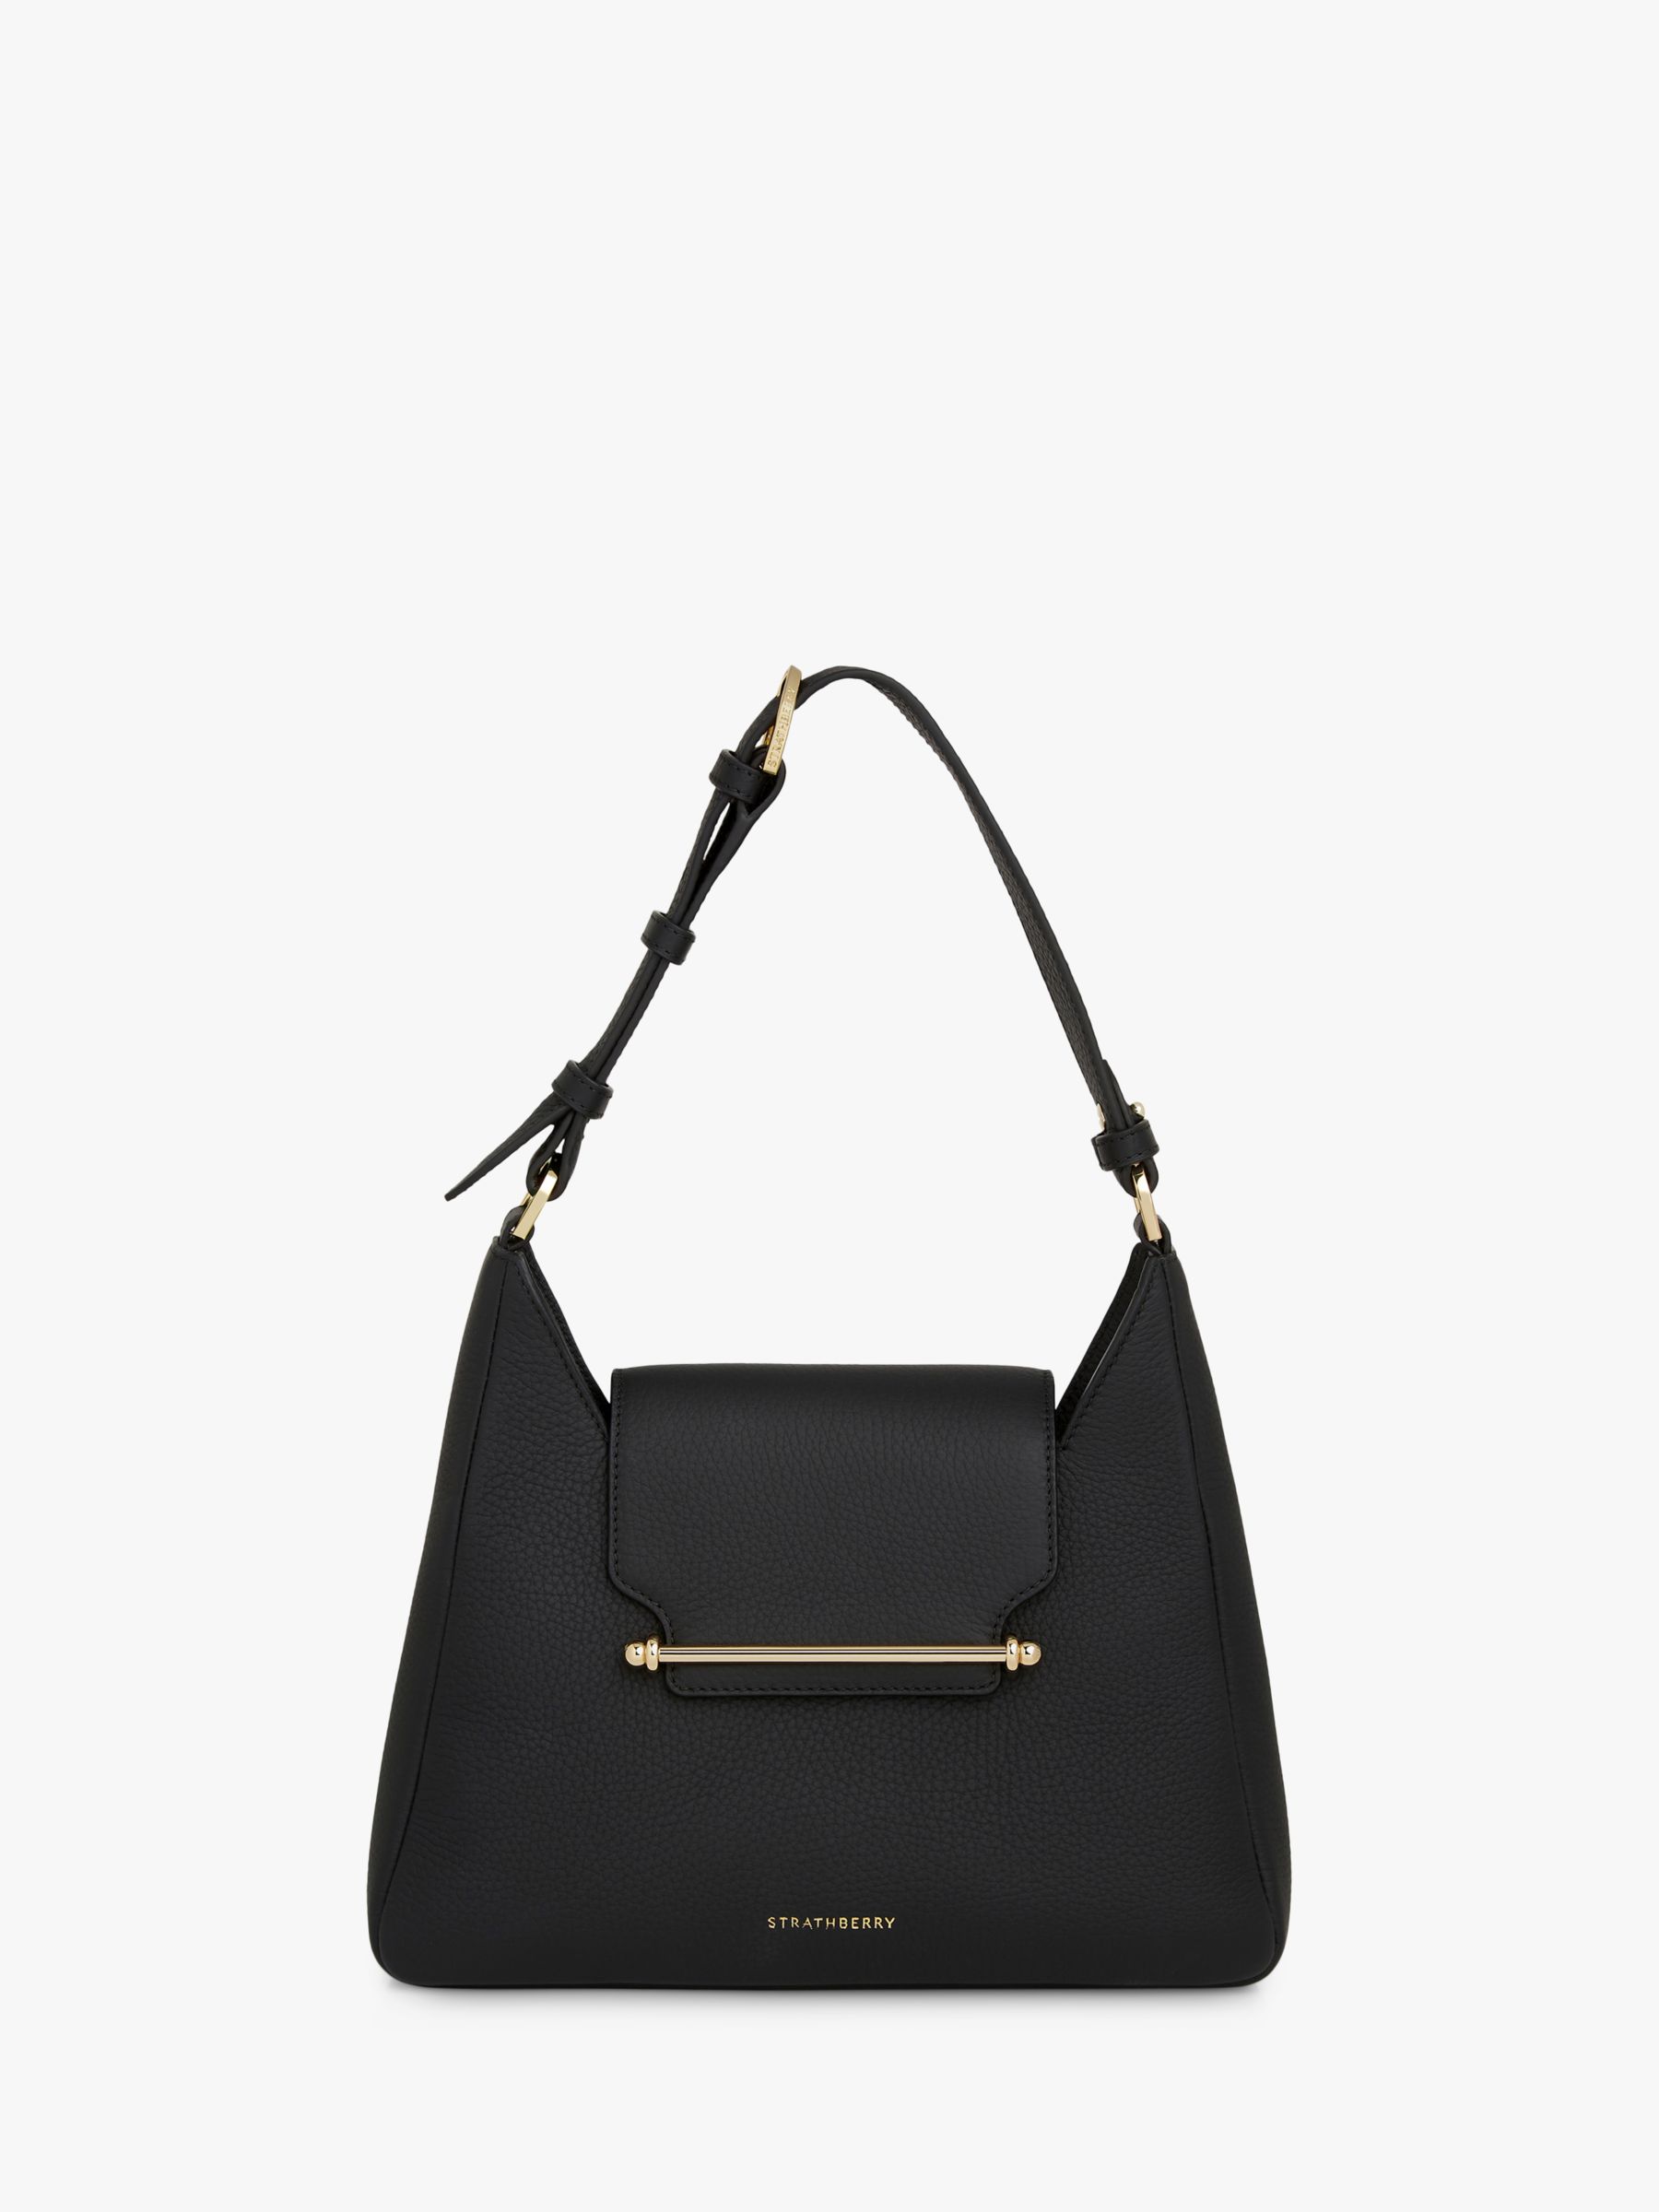 Strathberry Multrees Leather Hobo Bag, Black at John Lewis & Partners